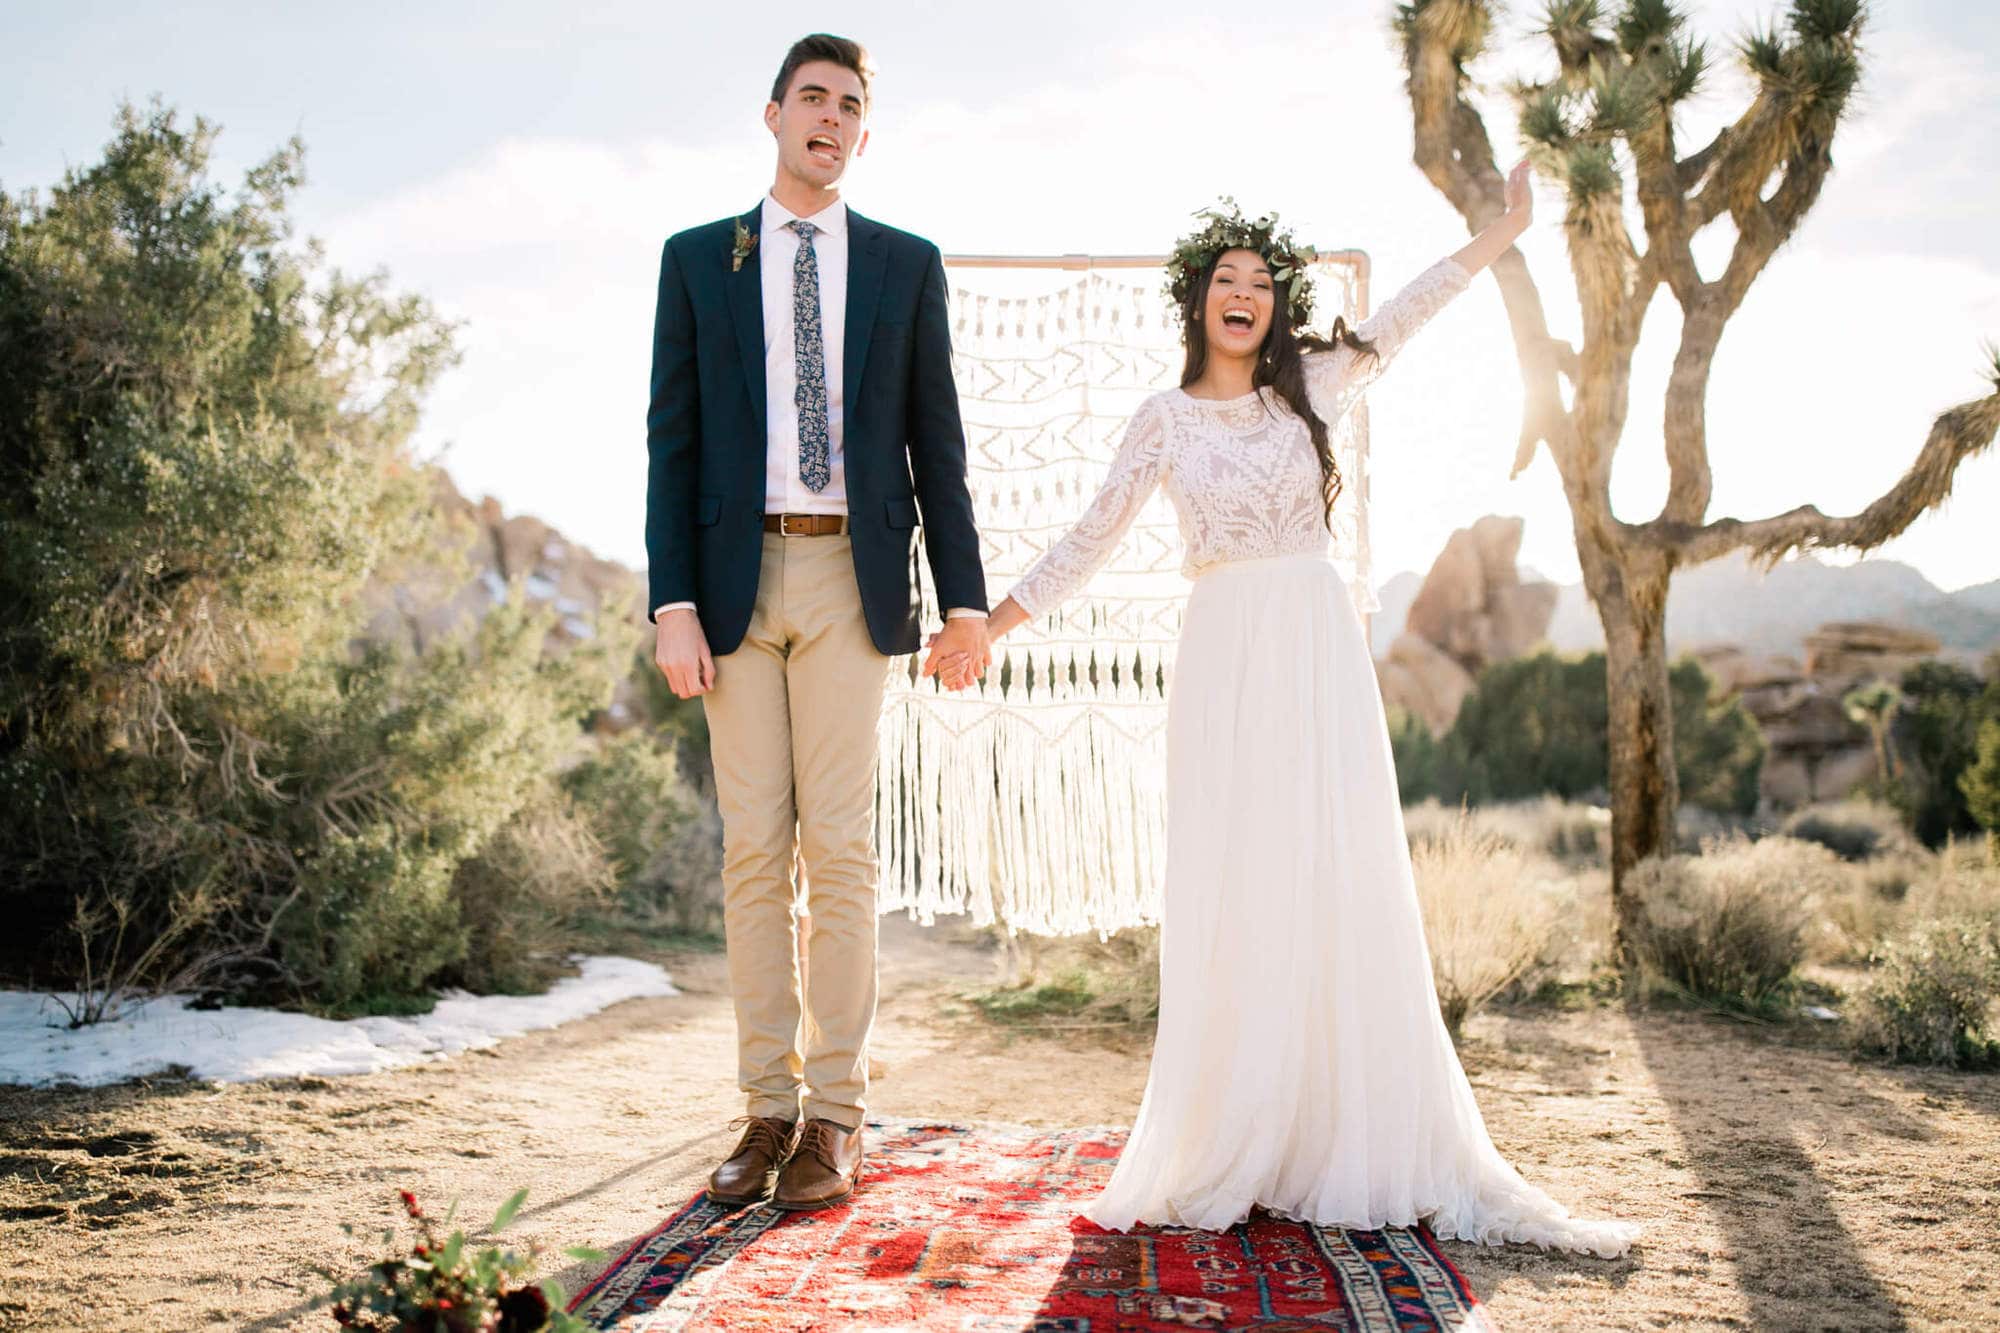 If you're planning an elopement in Joshua Tree National Park, then this is the guide is made for you. Here’s everything you need to know about planning a desert elopement.